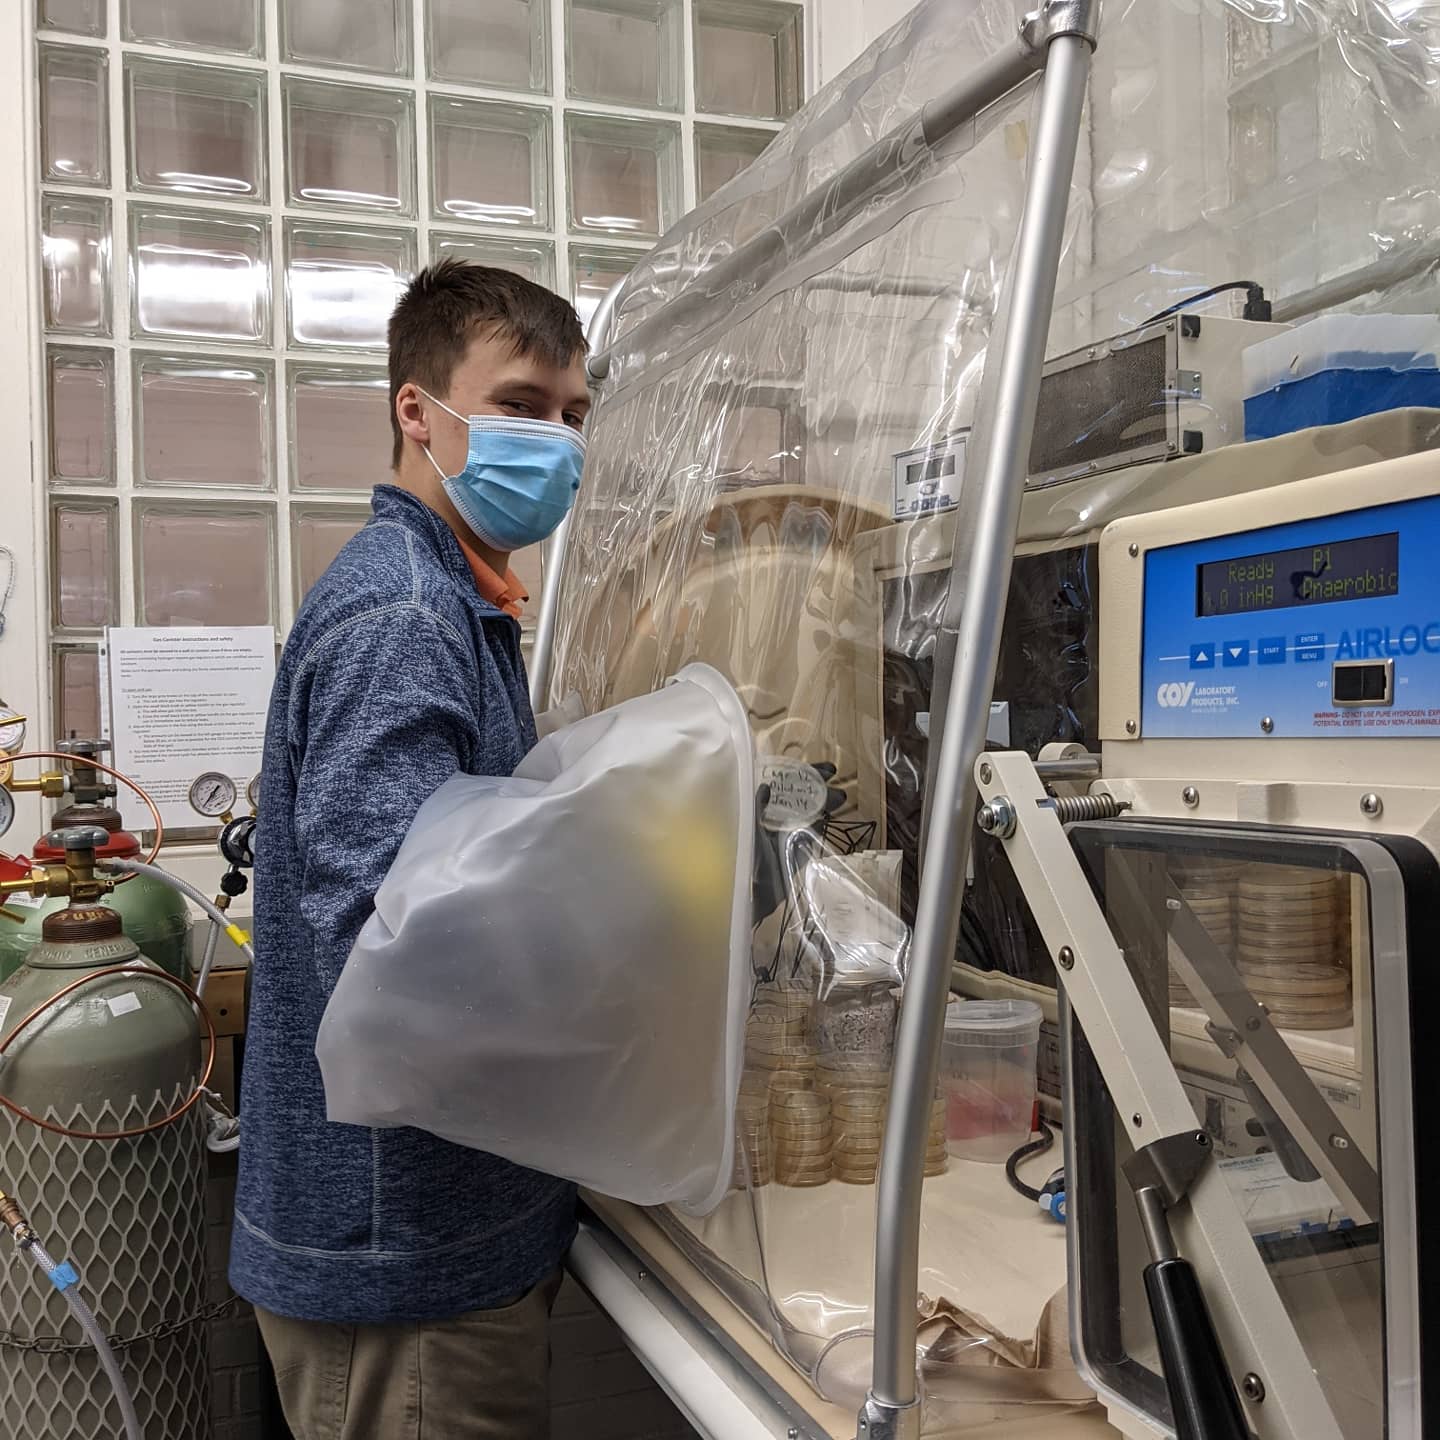 Joe Balkan, performing culturing of bacteria at the anaerobic chamber. Joe is wearing a face mask, and is holding up a culture plate. There are stacks of petri dishes inside the chamber.